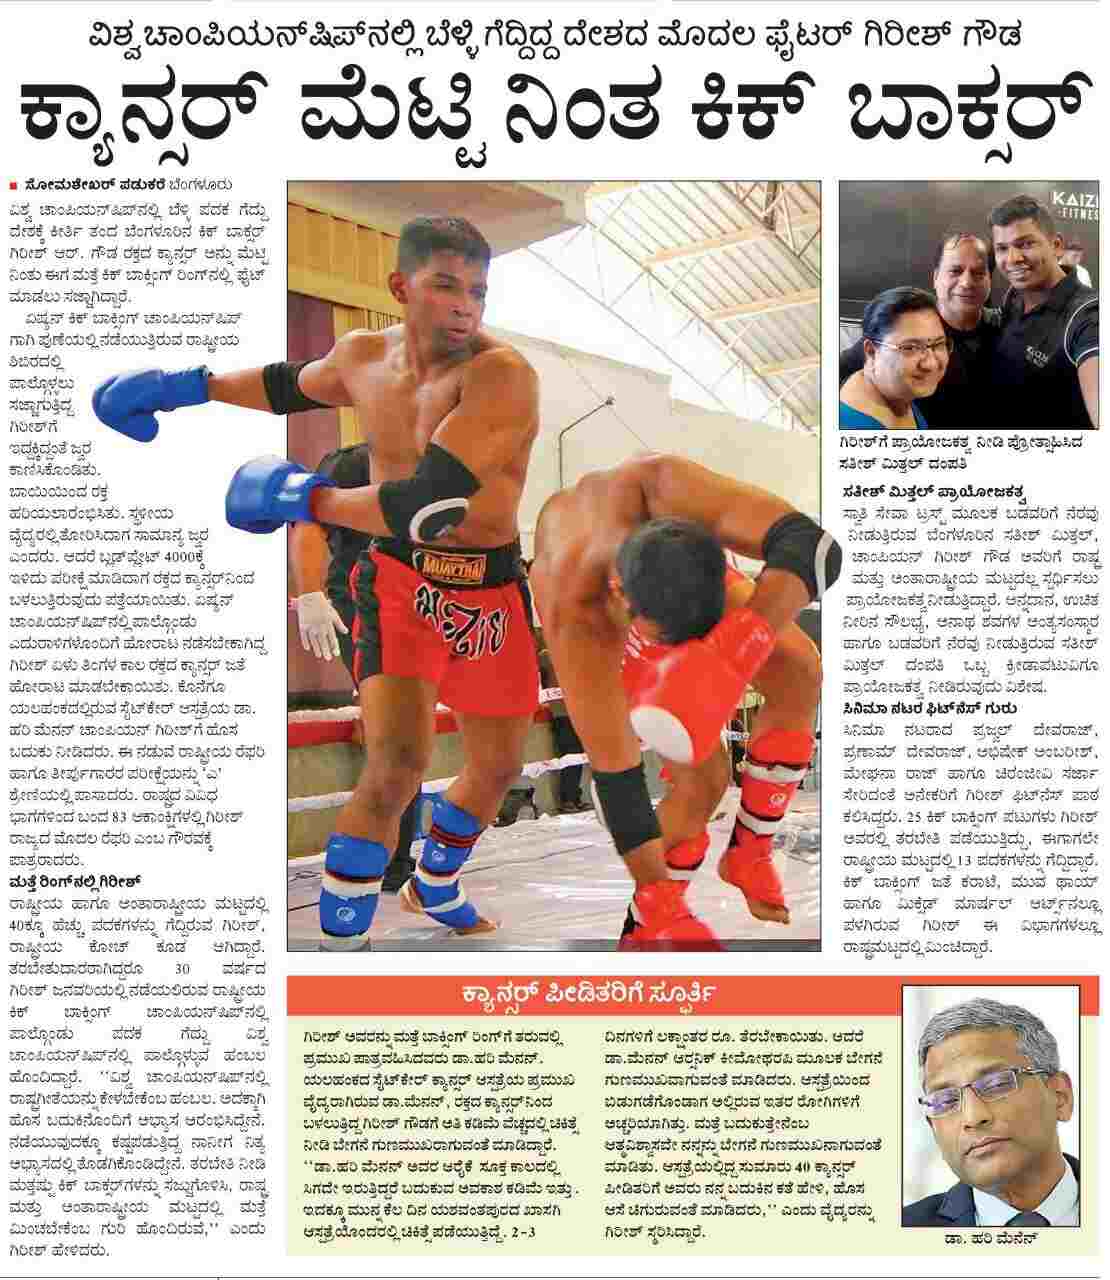 Girish Gowda, the First Fighter of the Country to Win Silver in the World Championships